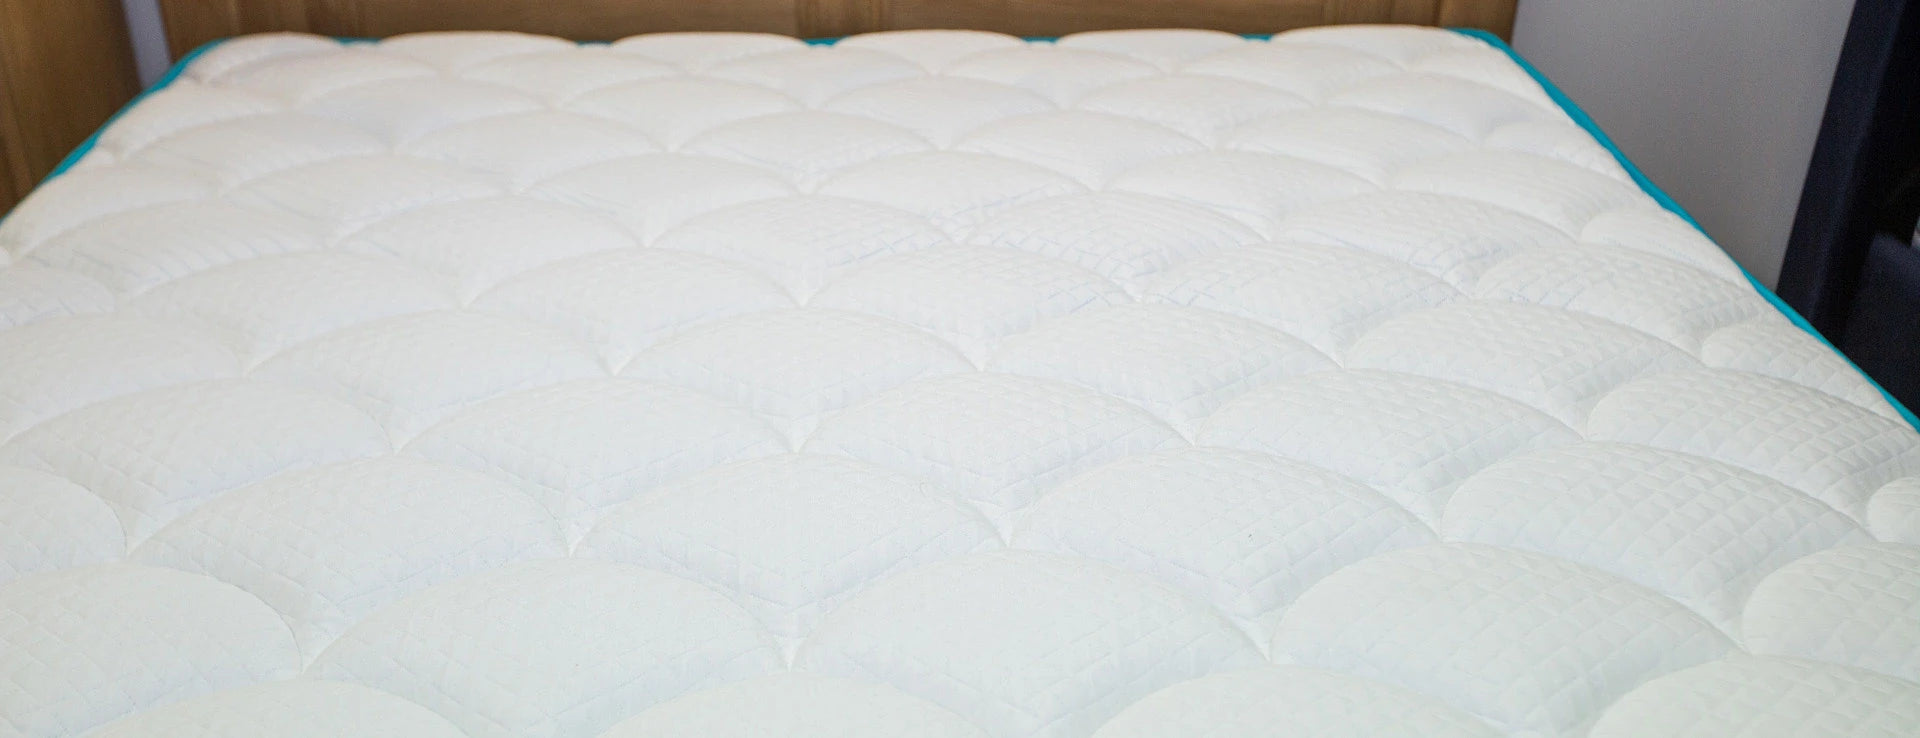 Mattresses Clearance - No Free Trial